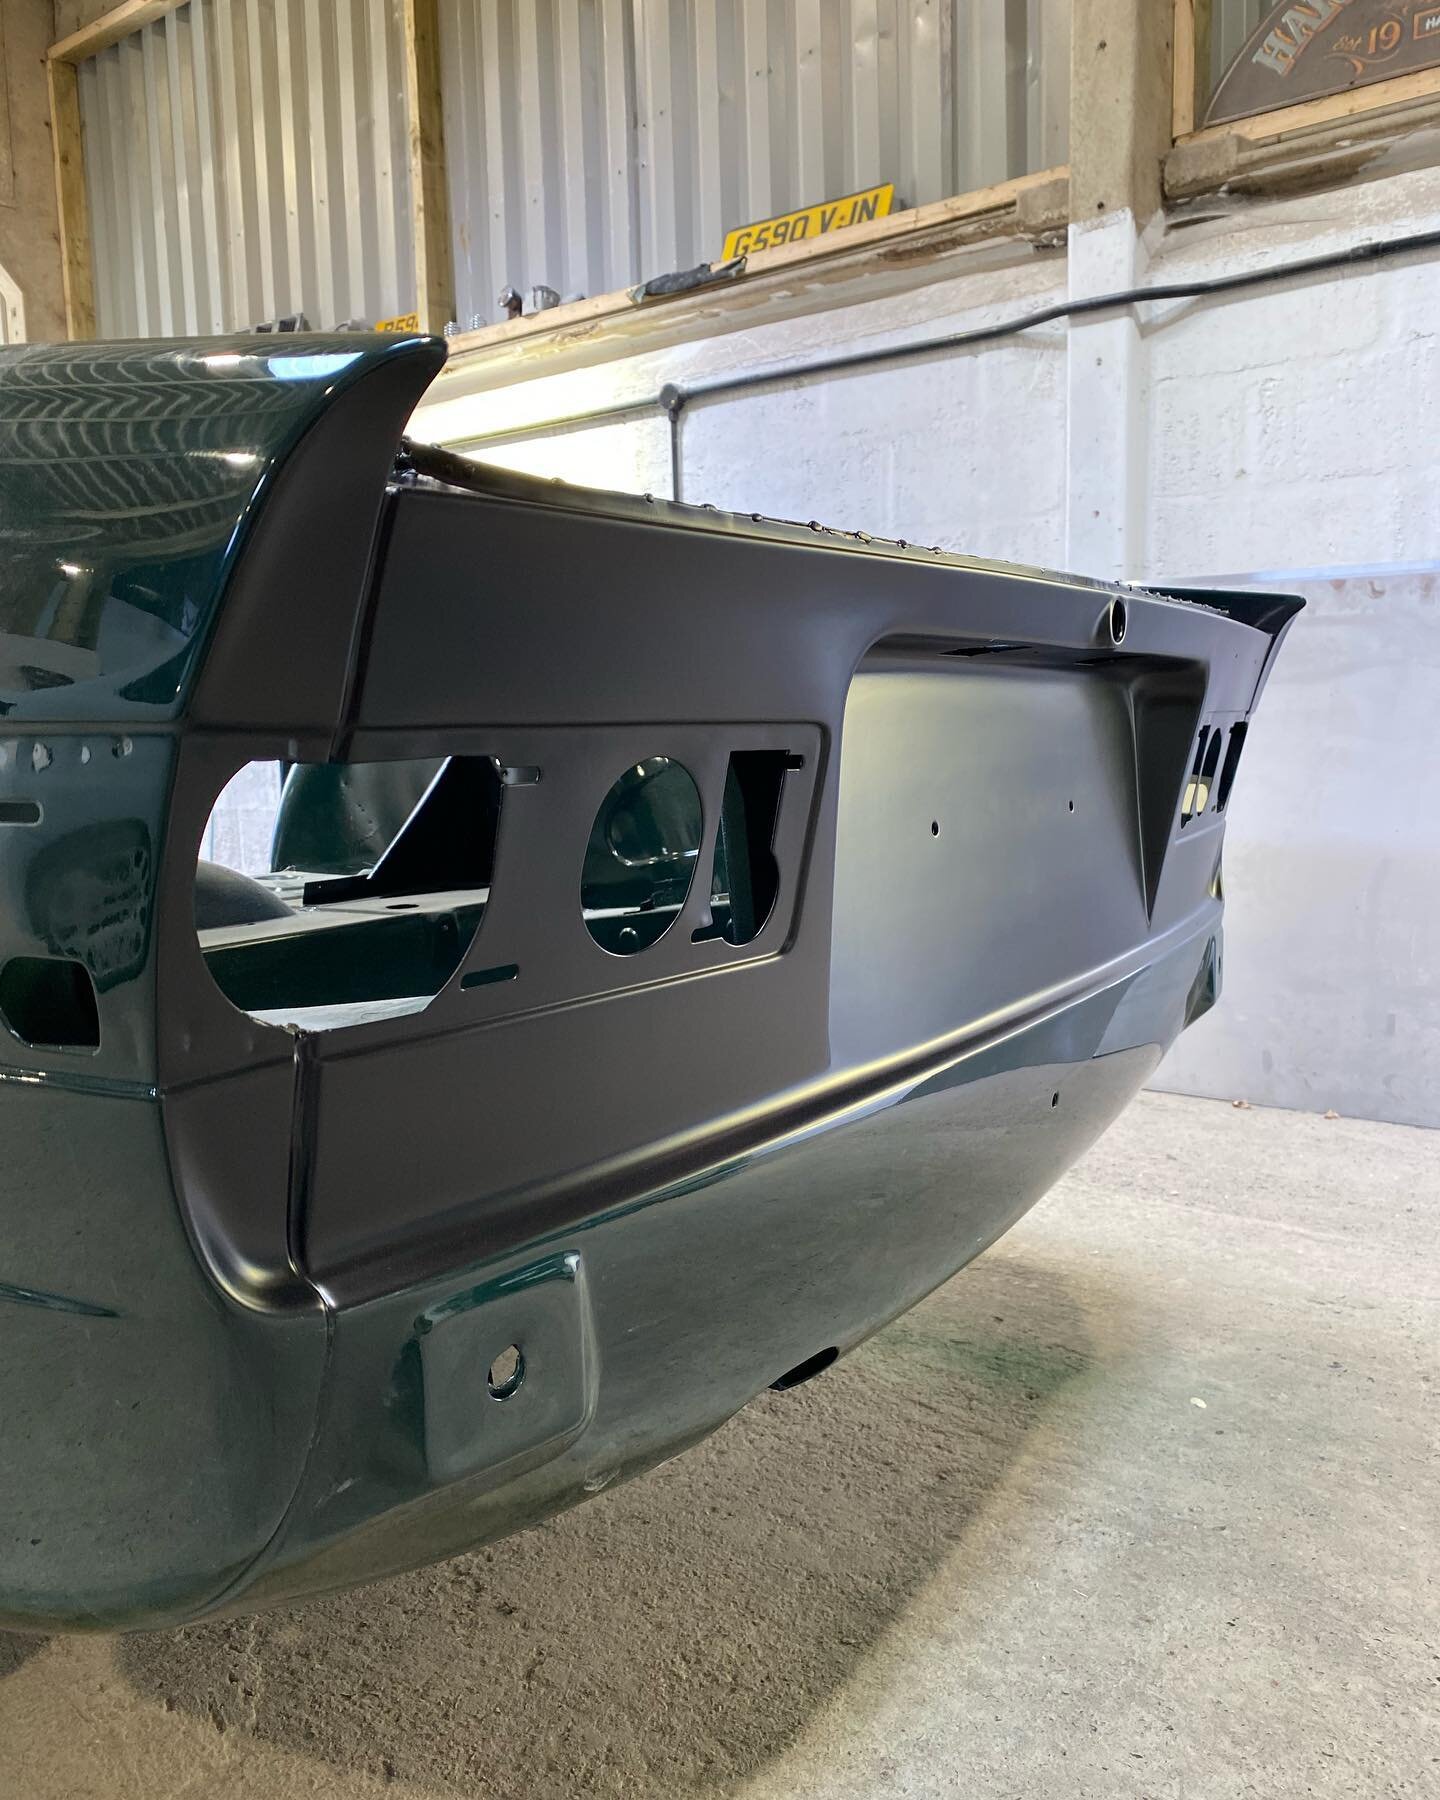 So close to finishing this one off, so nearly there&hellip;

Satin black sprayed on the hinges  and rear end of this newly restored Triumph TR6 as per factory specification! 
 
Really finishes it off, brings this wonderful little car to life! 

#triu